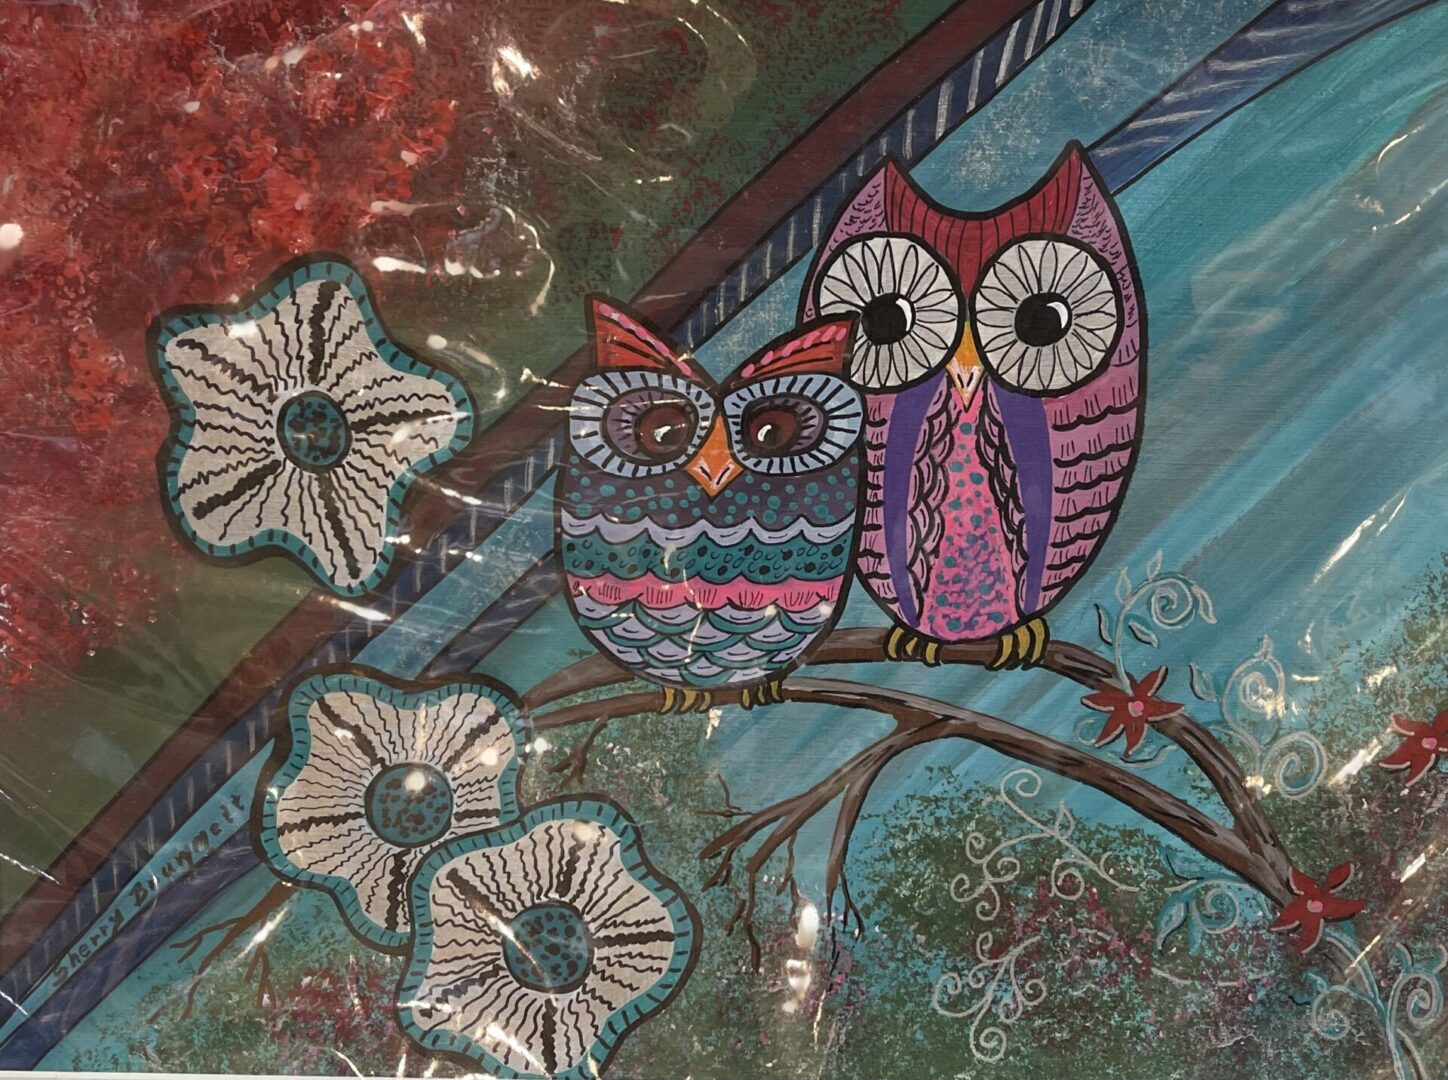 A painting of two owls sitting on a branch.